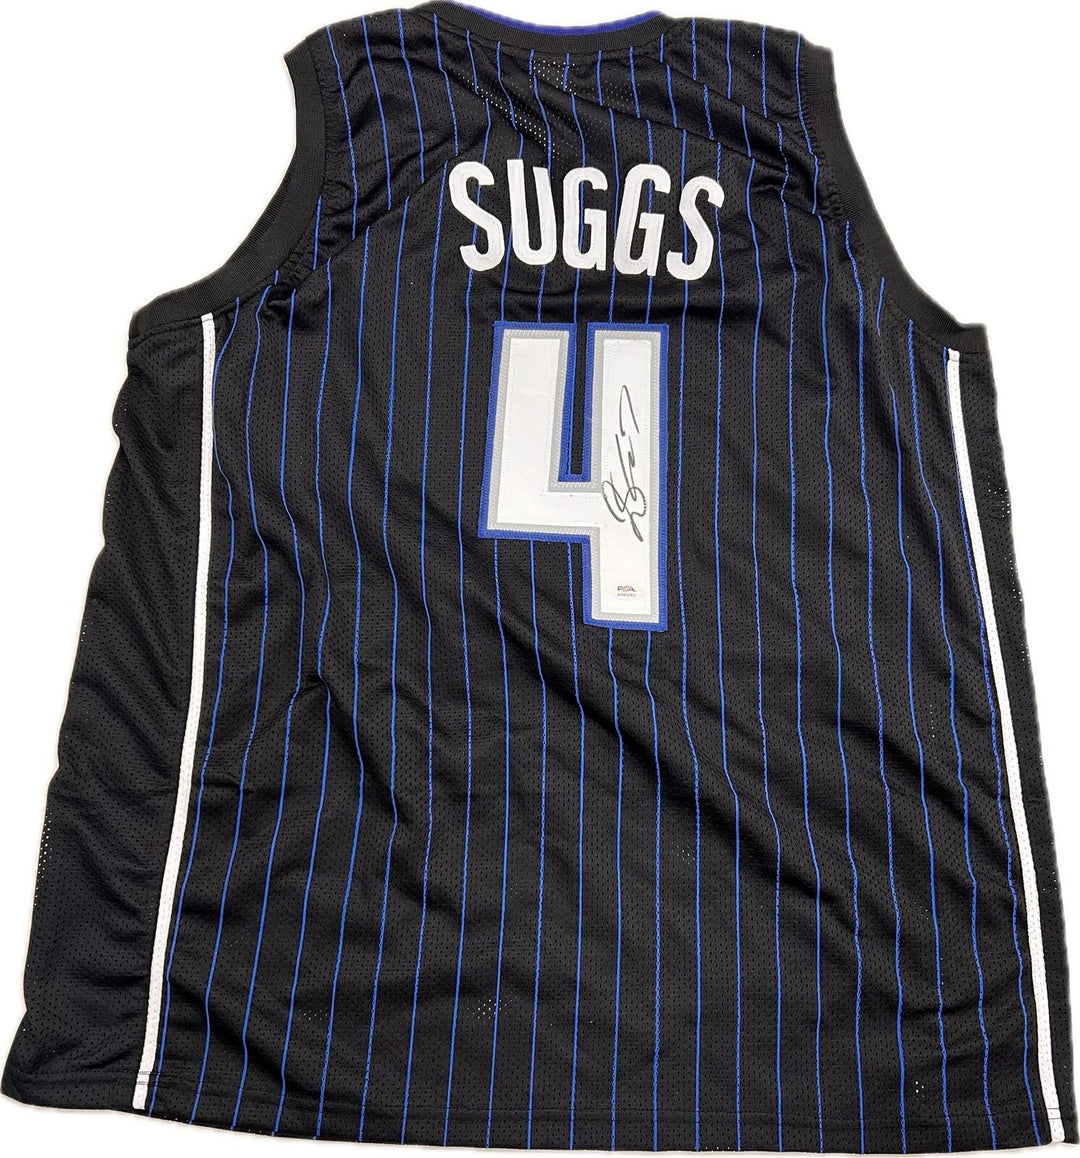 Jalen Suggs signed jersey PSA/DNA Orlando Magic Autographed Image 1